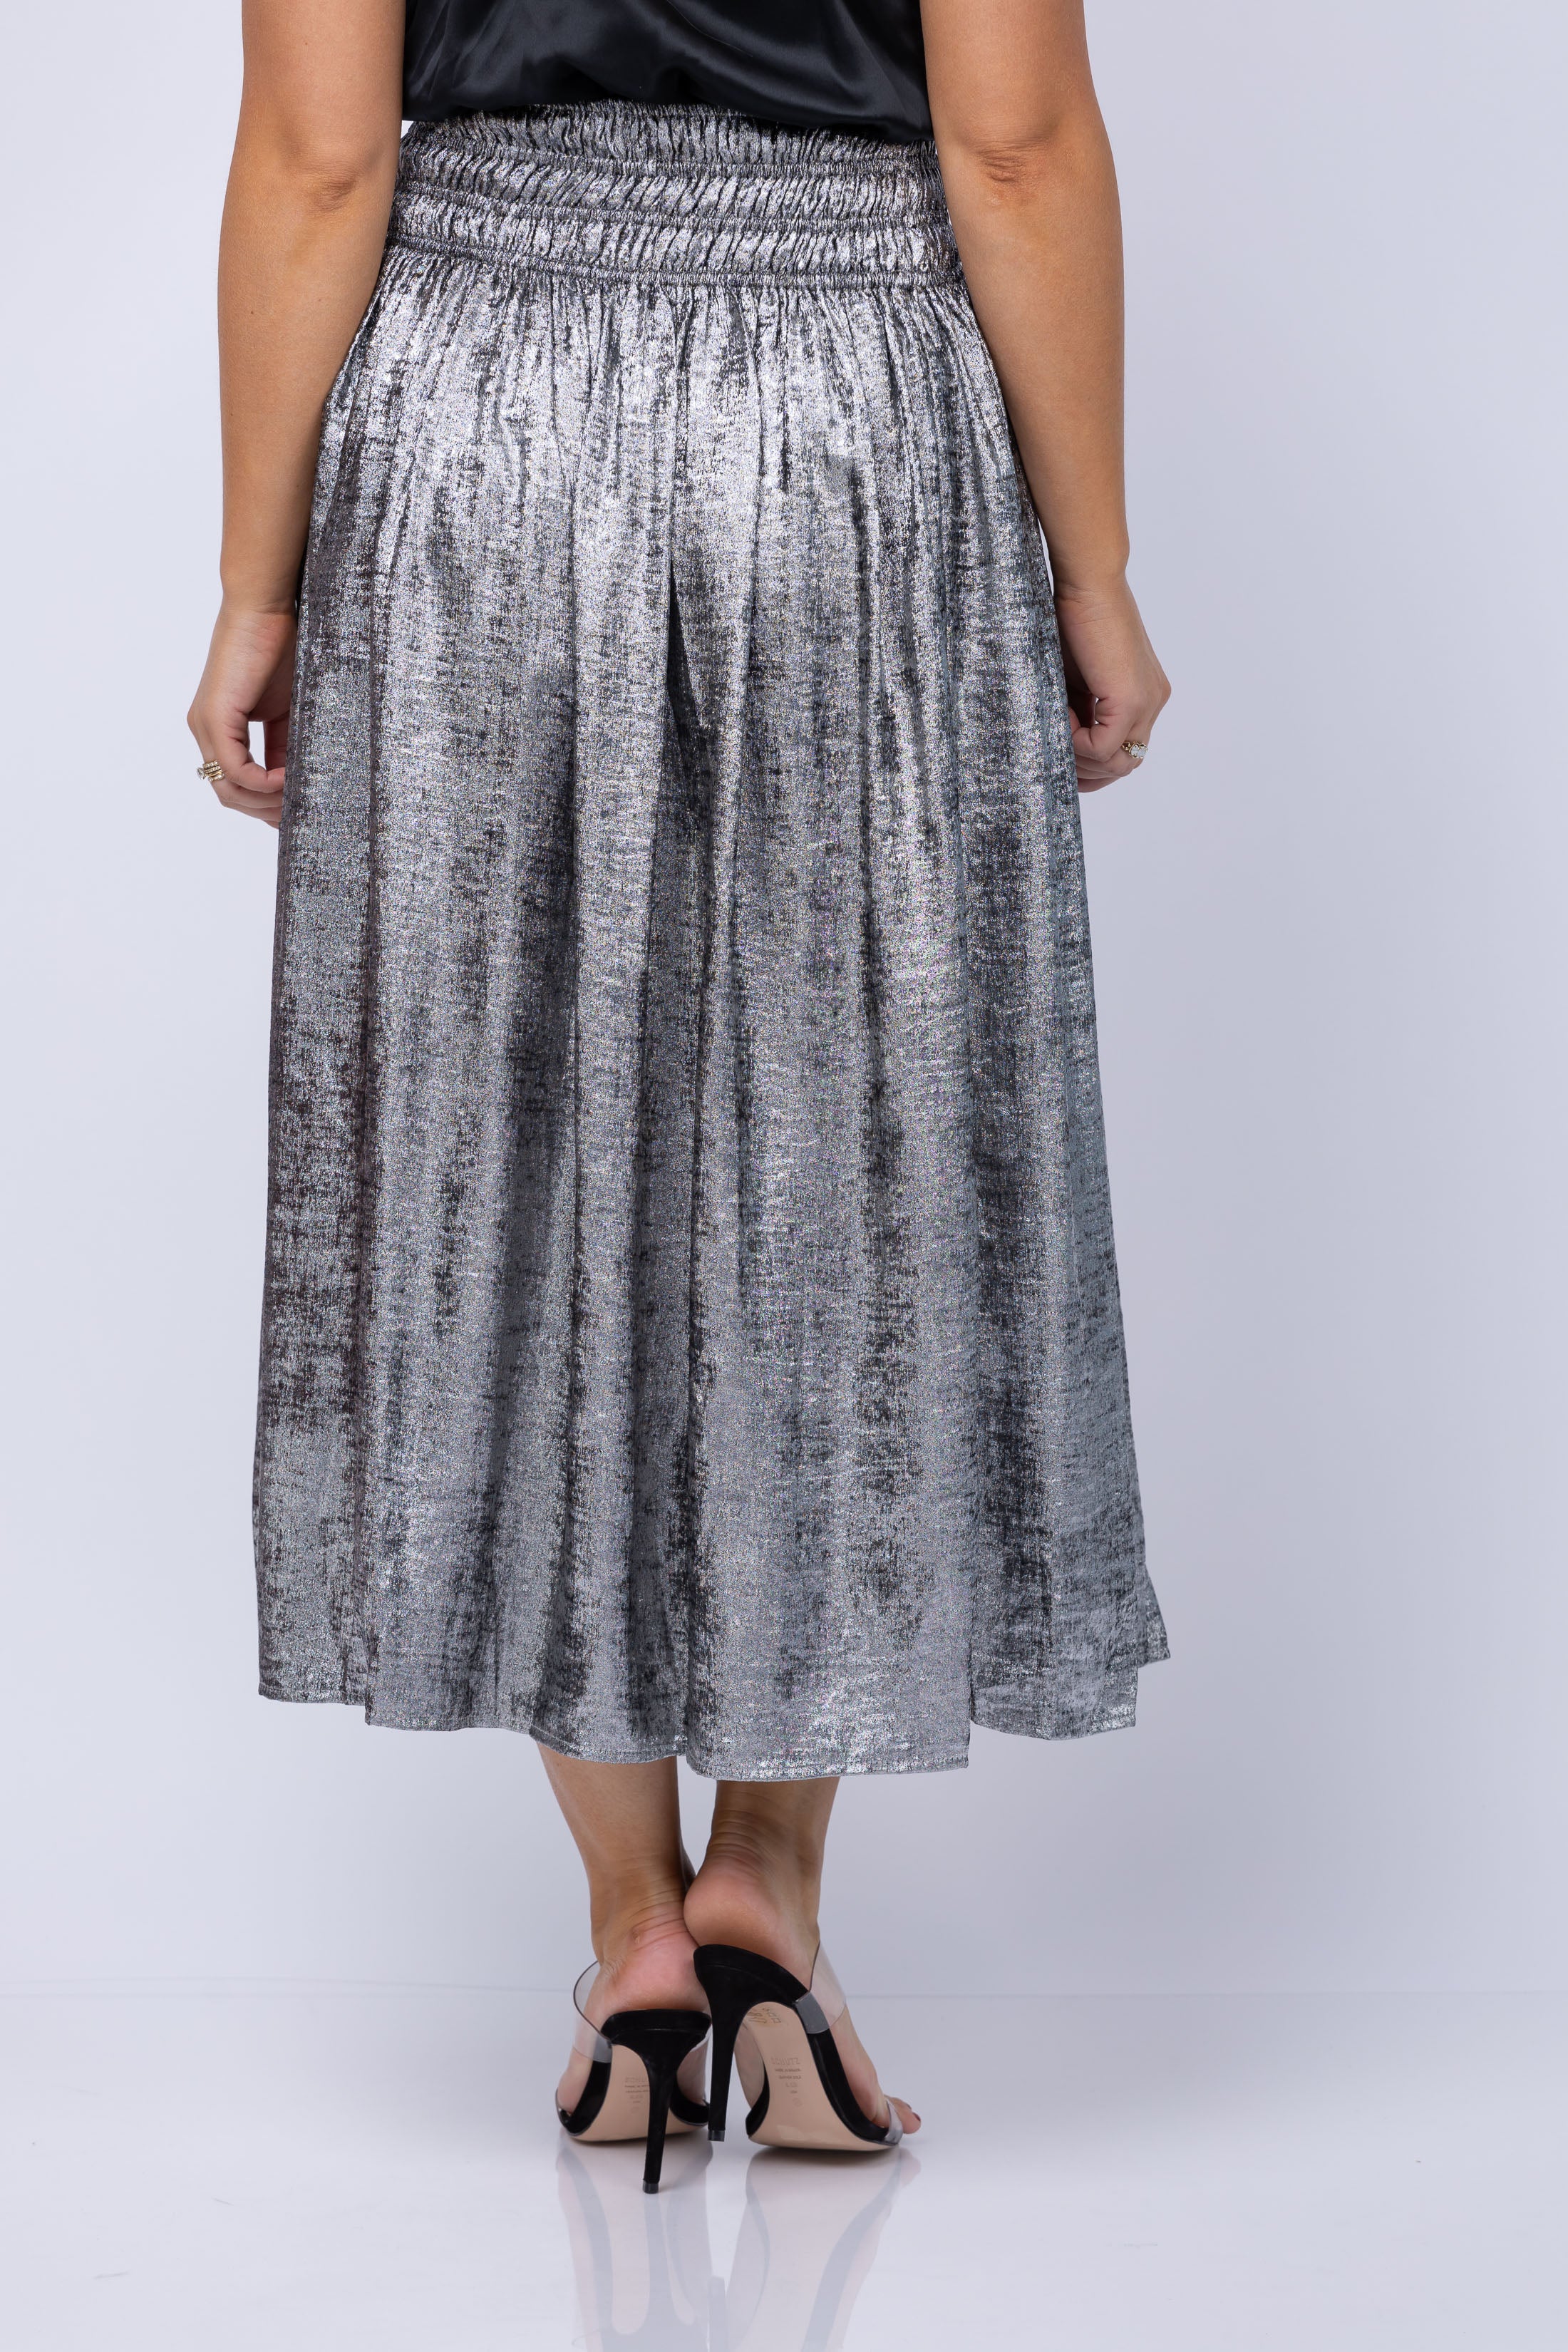 The Great. The Viola Skirt in Silver